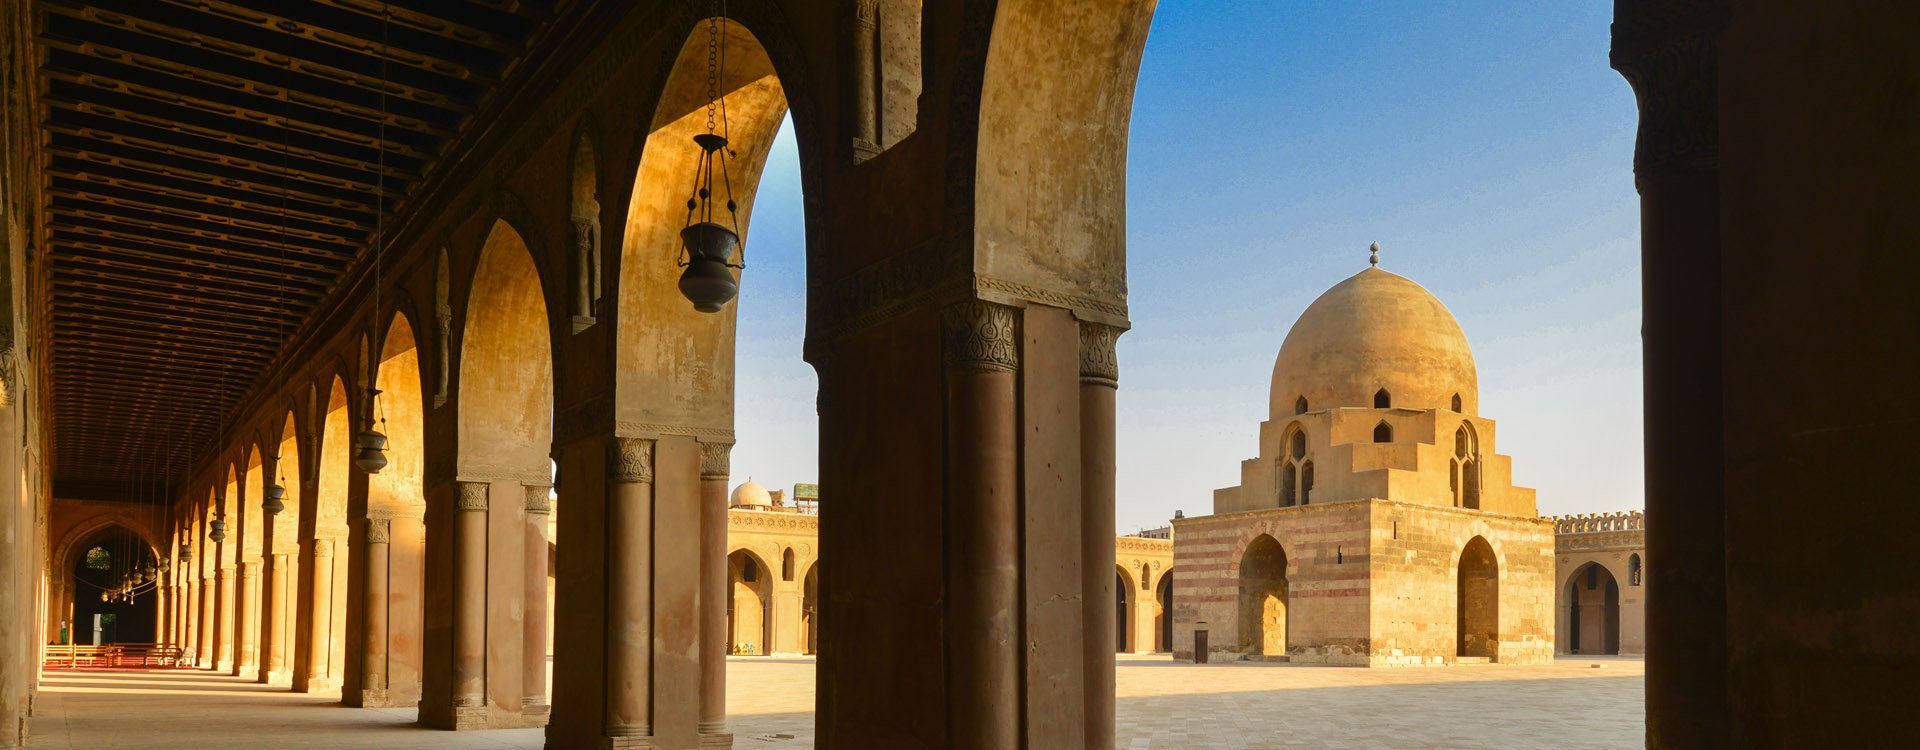 Ibn Tulun Mosque in Cairo, Egypt. The Mosque is the oldest Mosque 265 AH or 879 AD